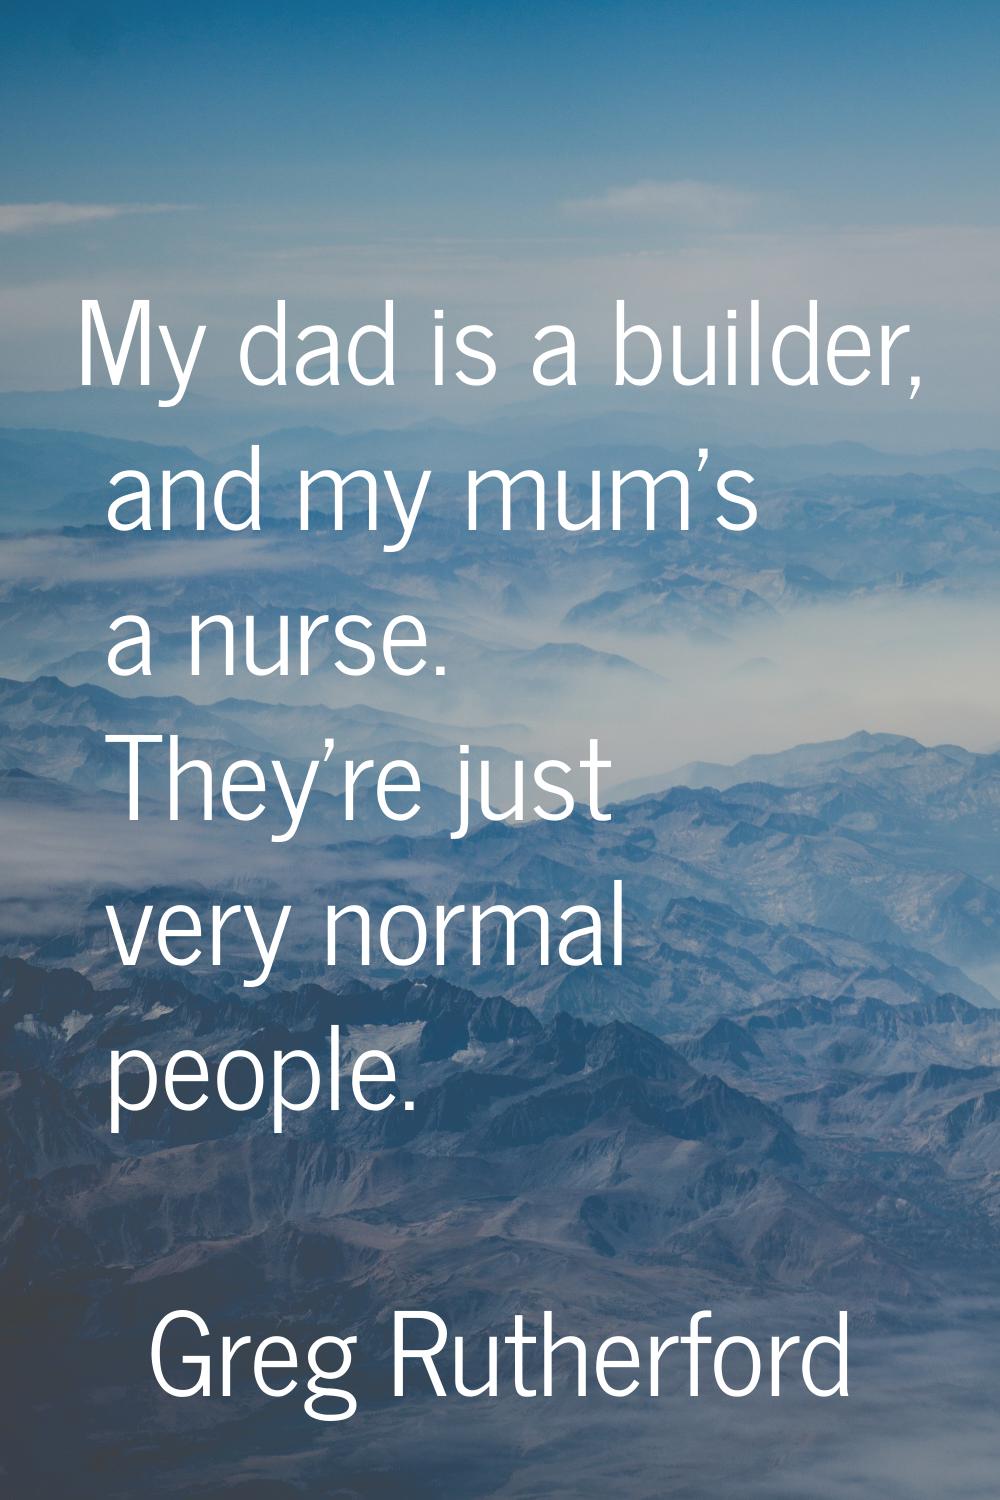 My dad is a builder, and my mum's a nurse. They're just very normal people.